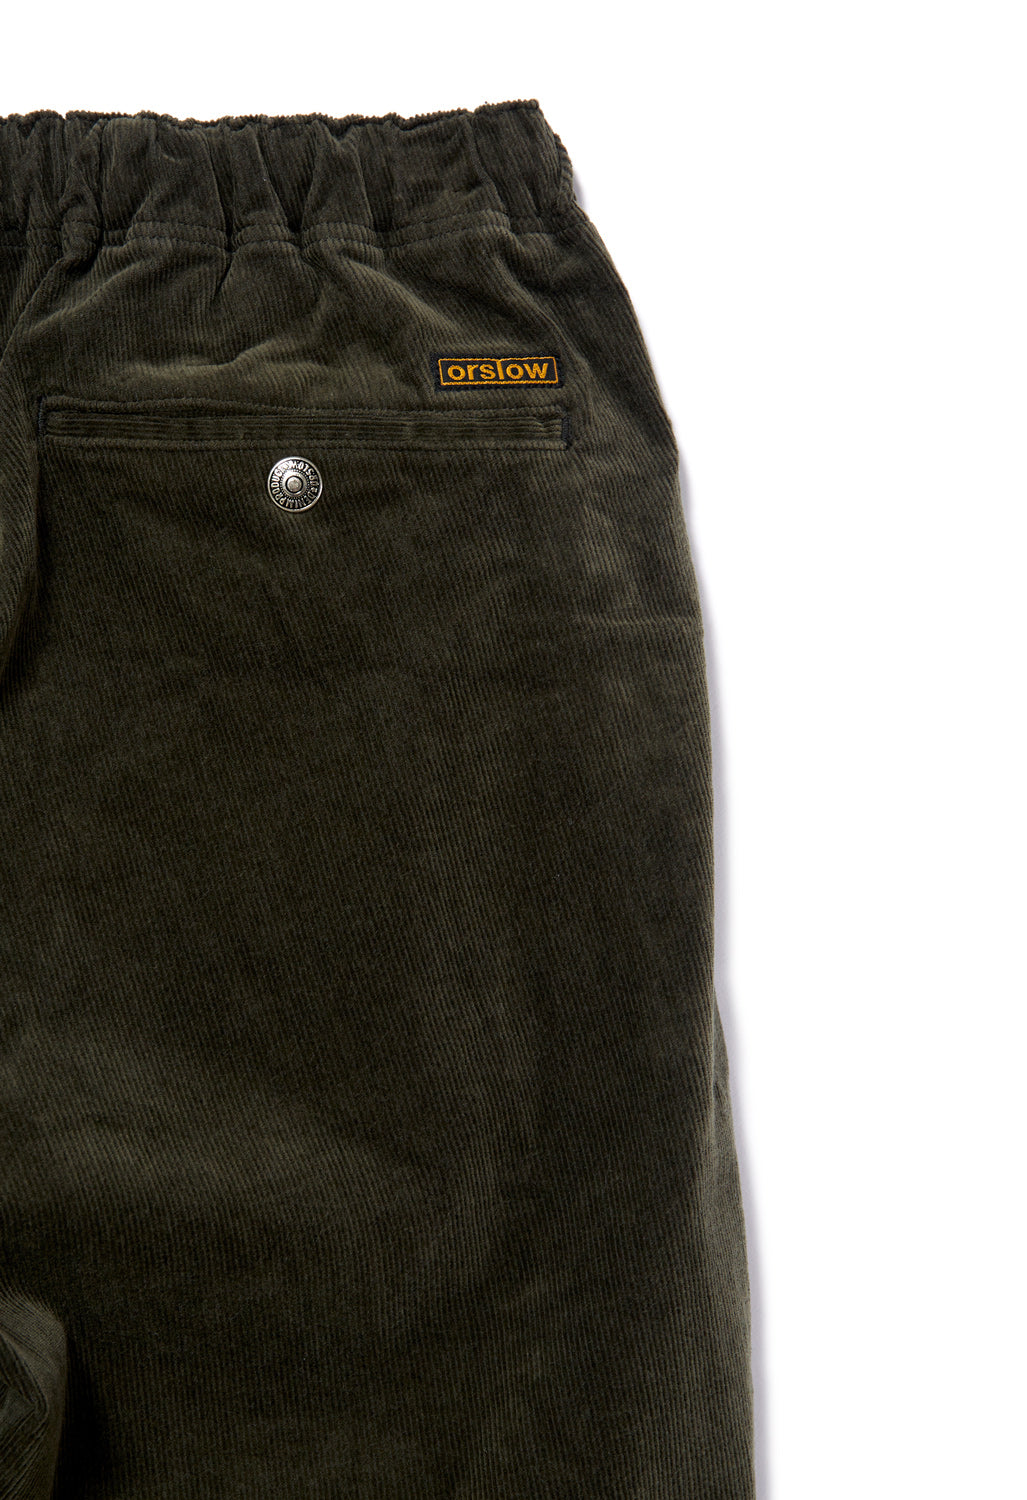 orSlow New Yorker Stretch Corduroy Pants - Army Green